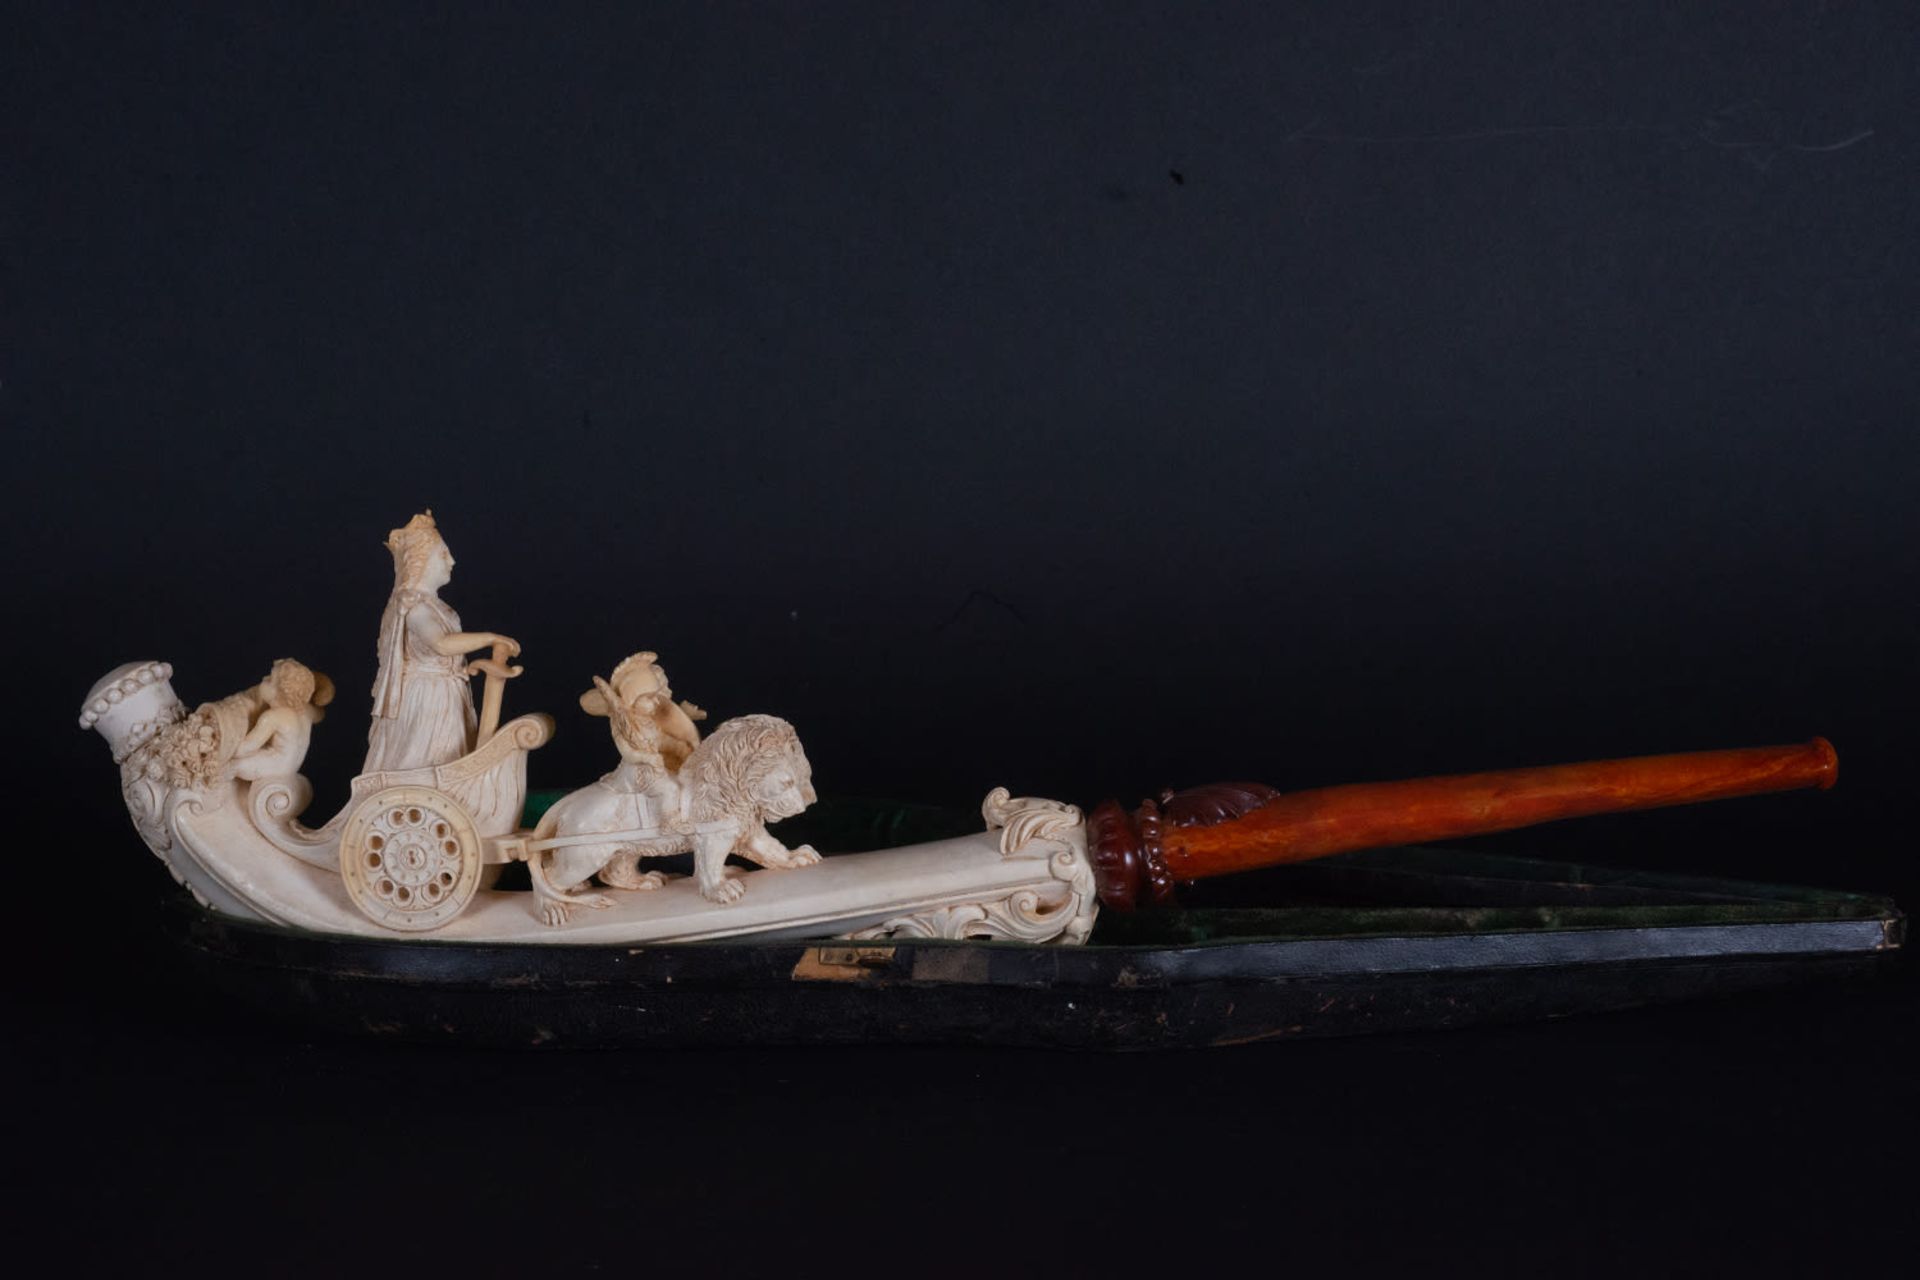 Rare and Exceptional Sea Foam Pipe and Amber Representing the Goddess Cibeles, 19th century - Image 13 of 15